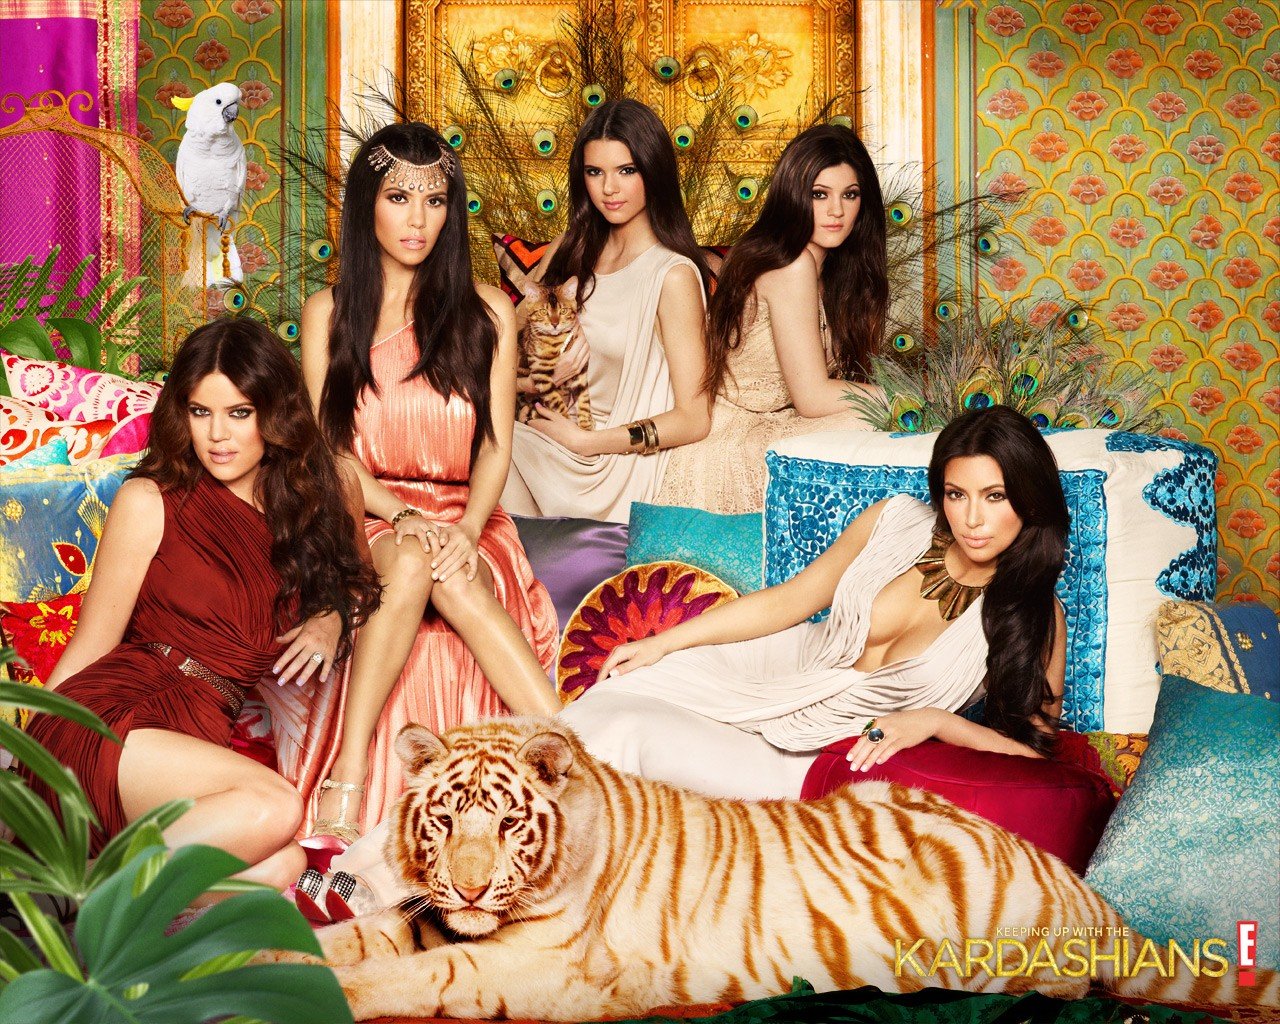 Keeping Up With The Kardashians #5